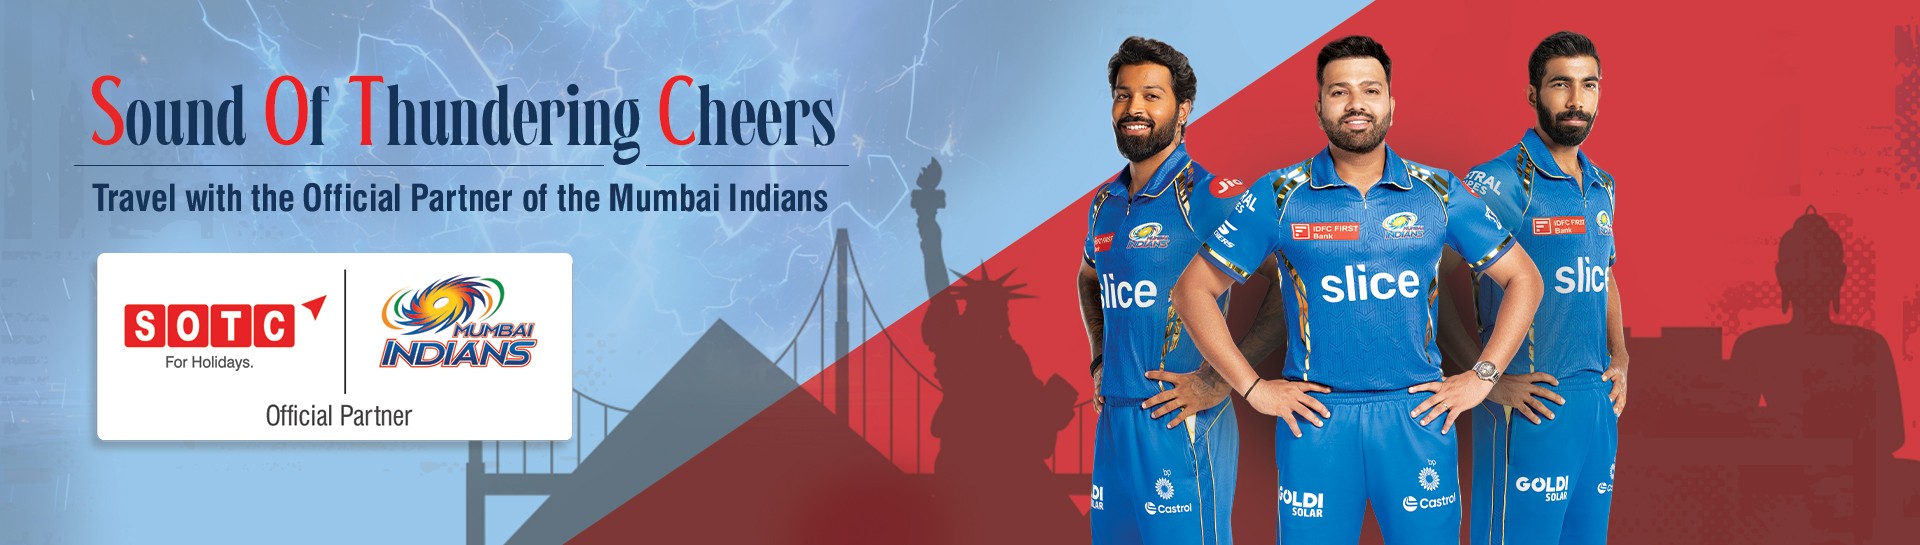 SOTC Now an Official Partner of Mumbai Indians - A winning combination of Cricket & Travel Adventures!